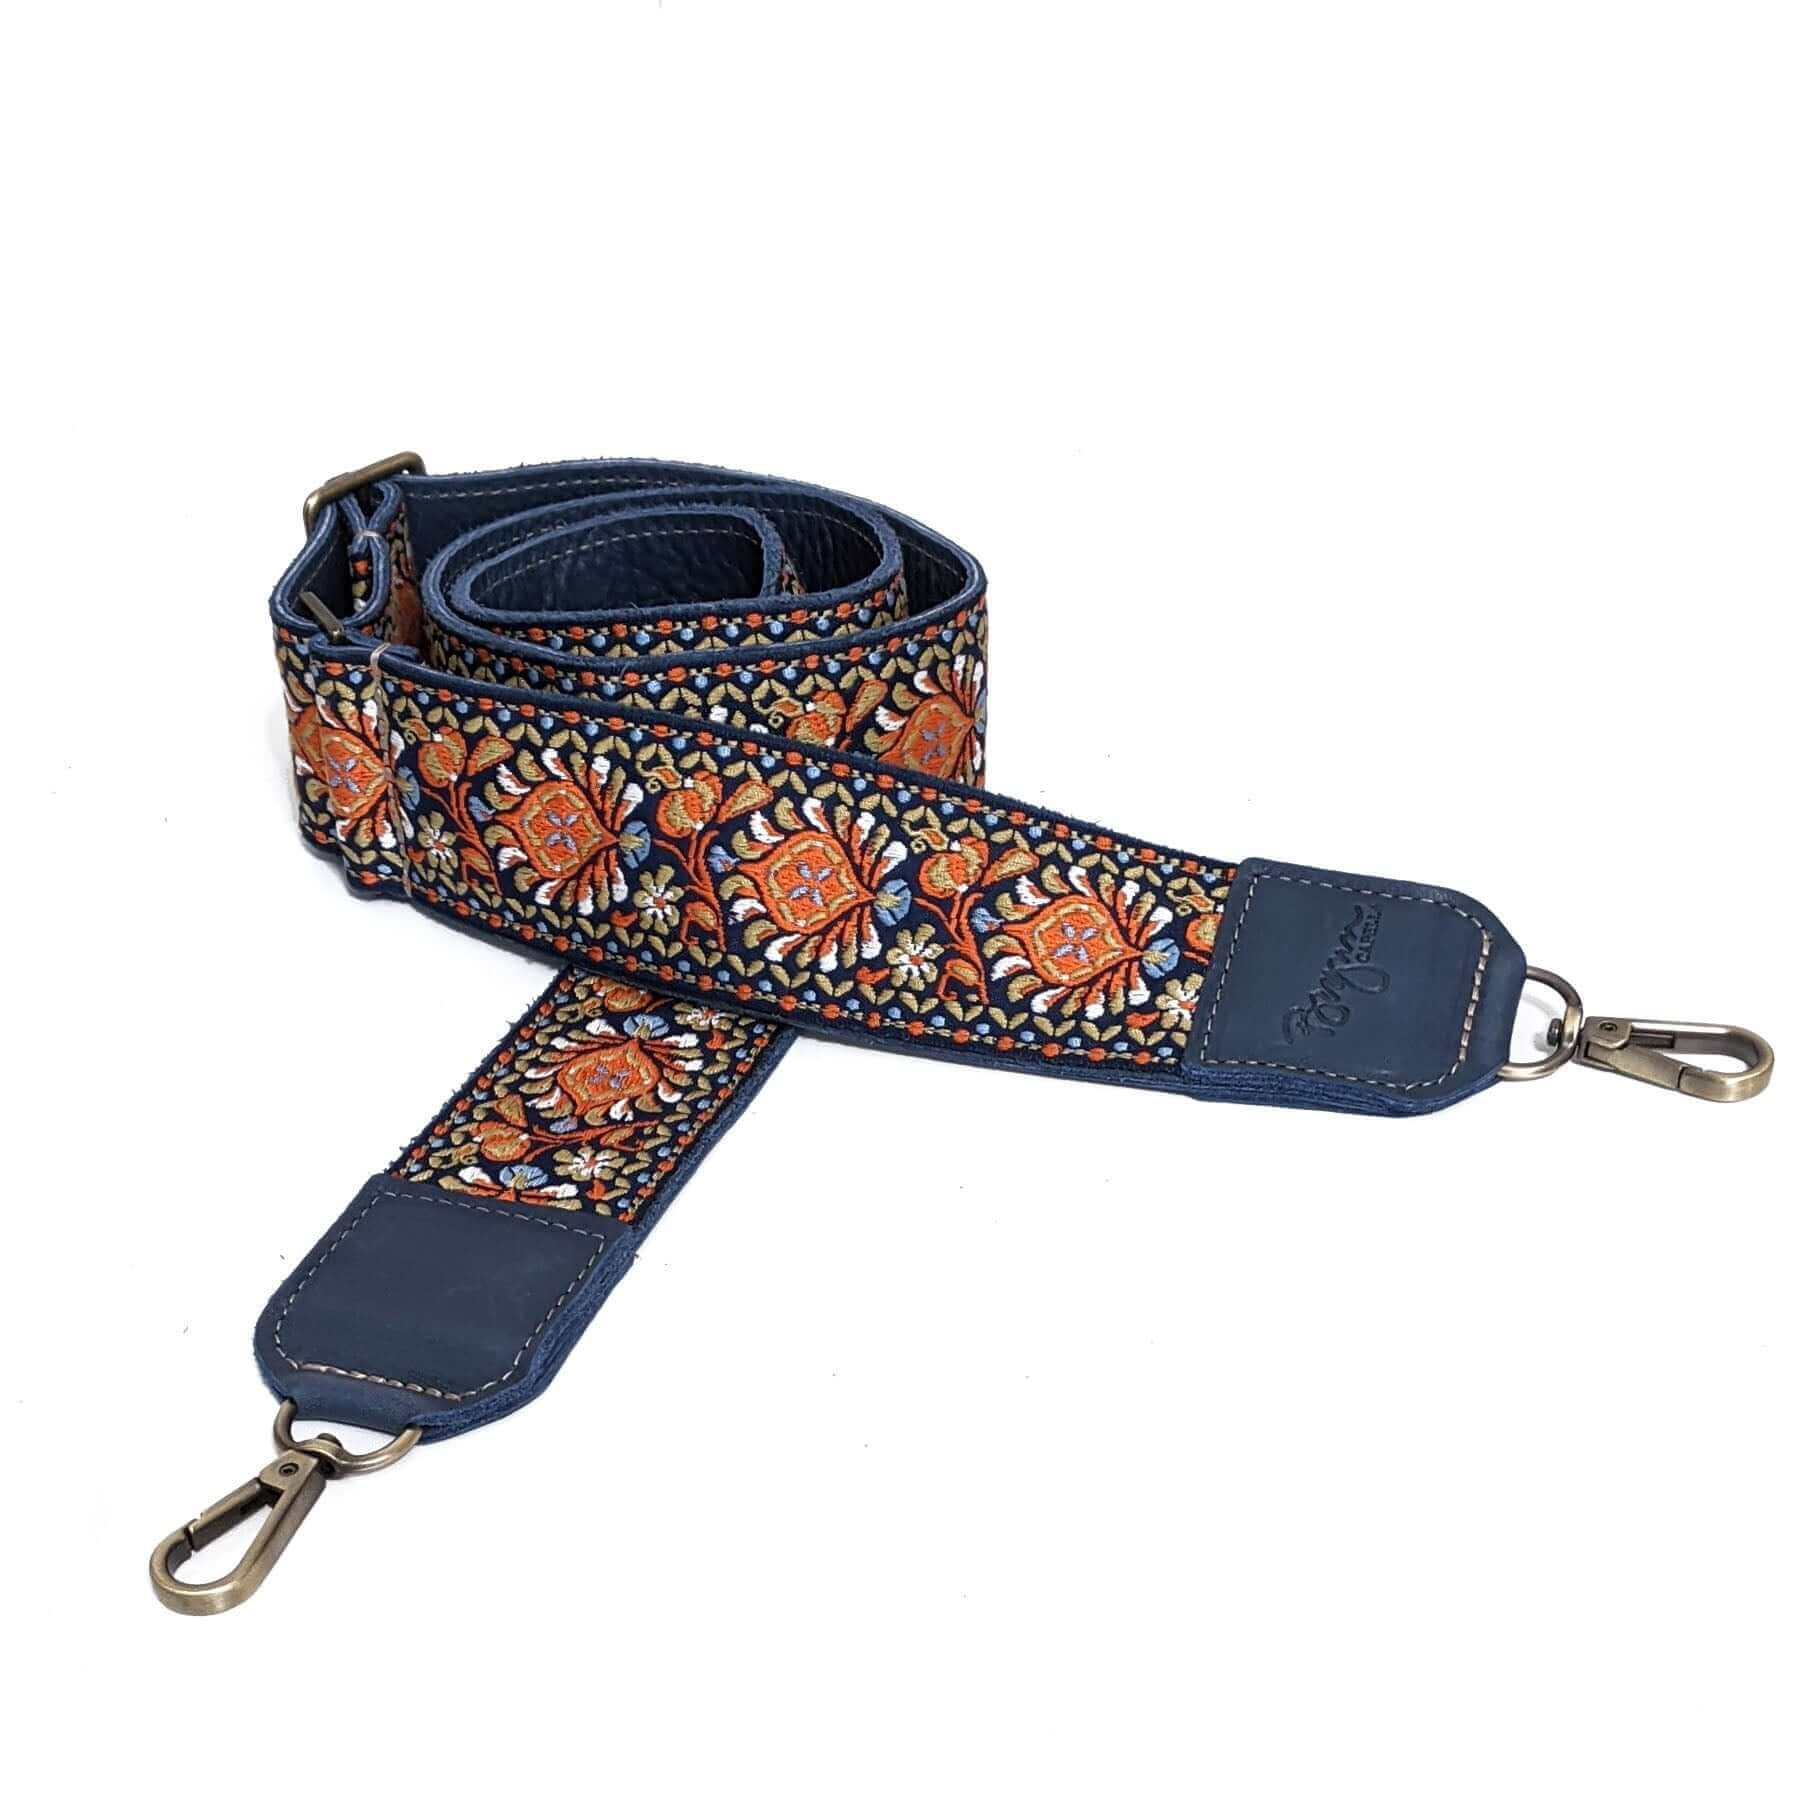 Crossbody Straps for Bags, Messengers, Purses, Duffels, Clutches